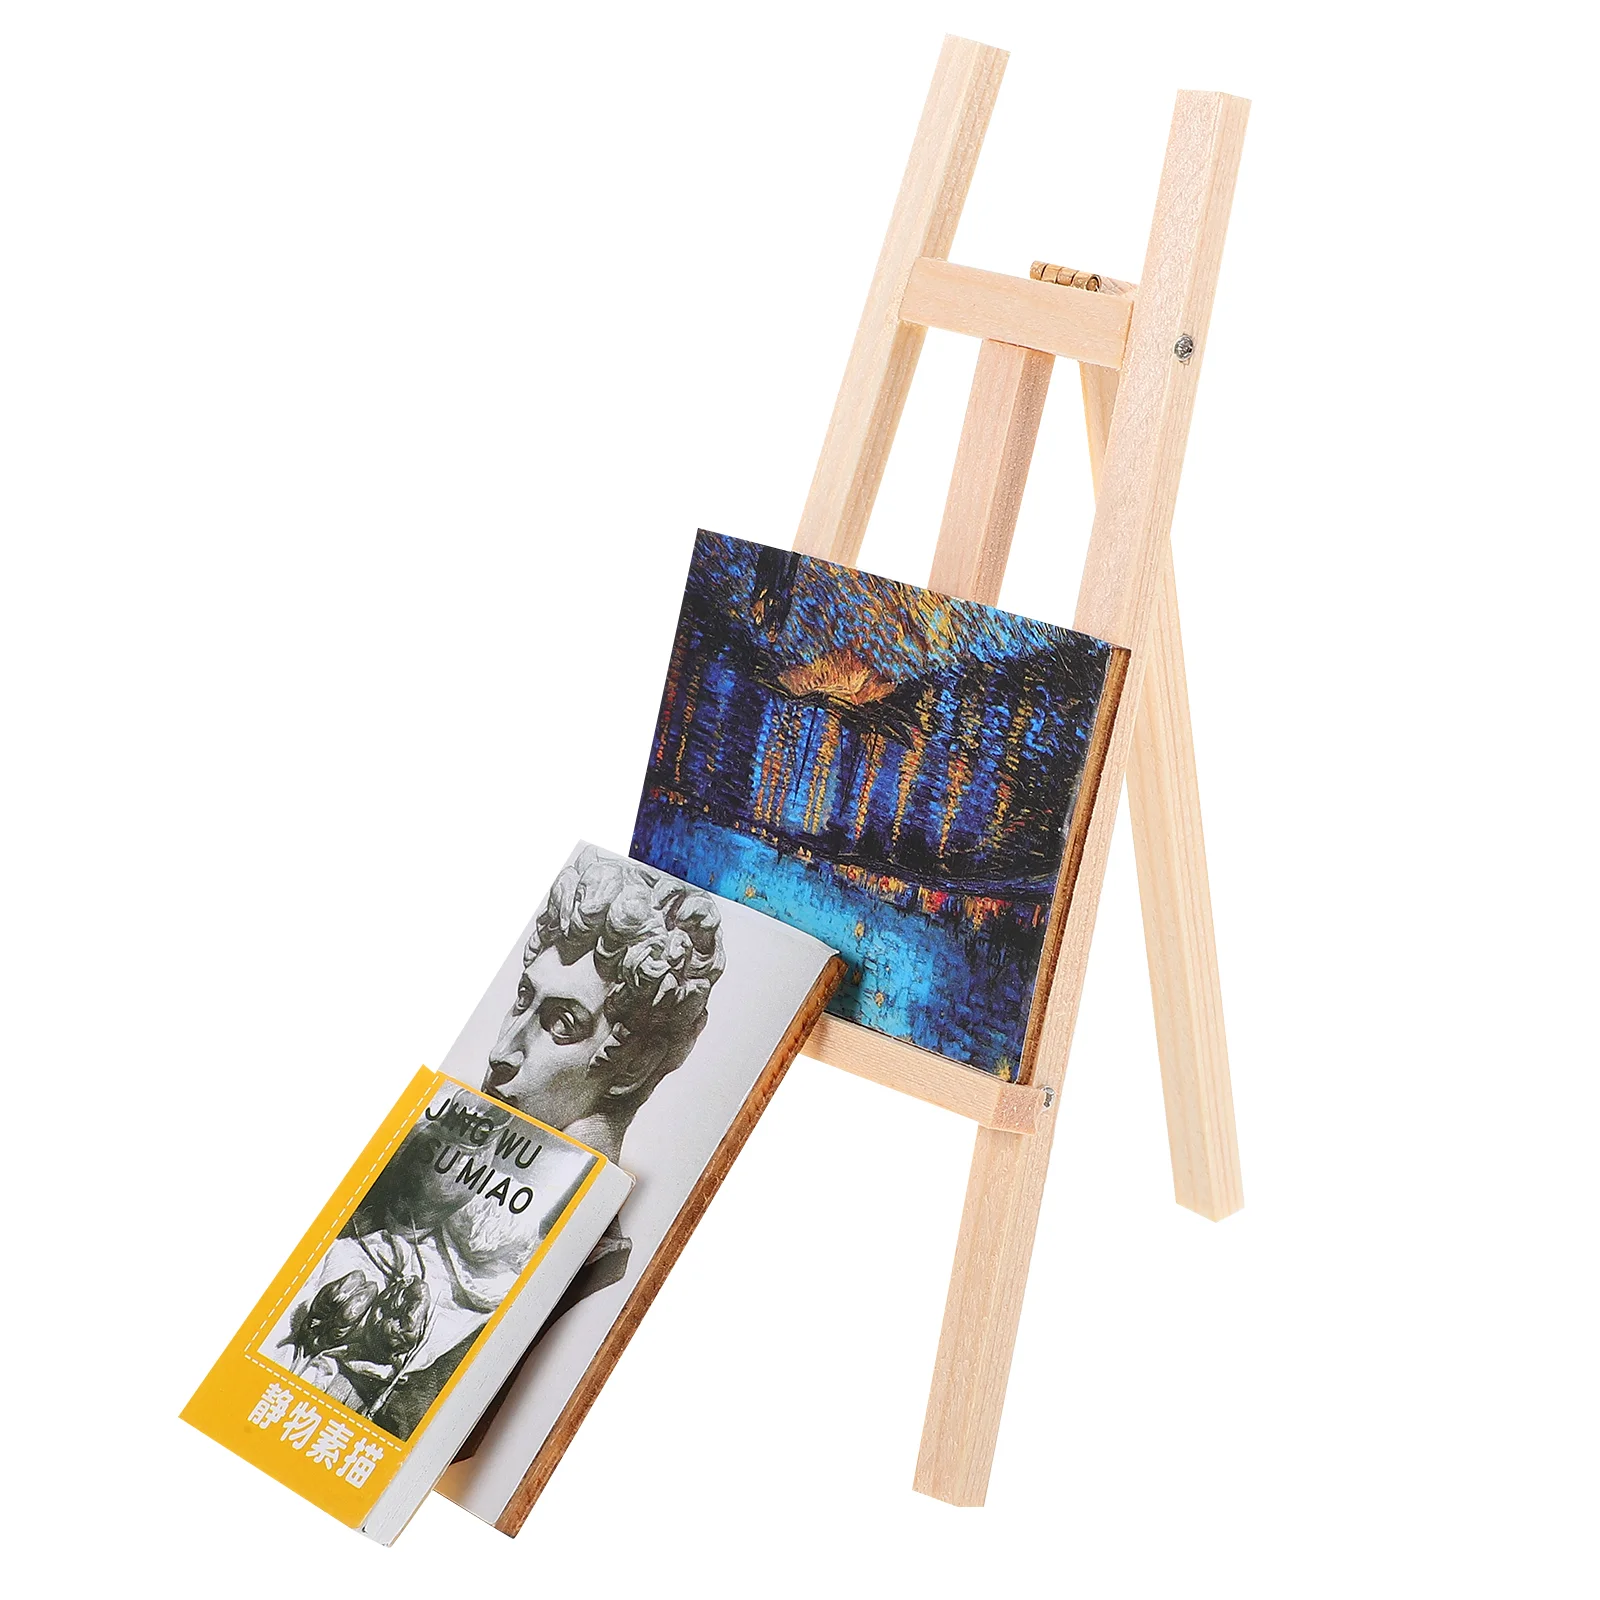 House Decorative Painting Mini Adornment Miniature Easel Wooden Board Furniture Small Model wear resistant painting stand easel for poster board display shelf aluminum alloy household school show rack